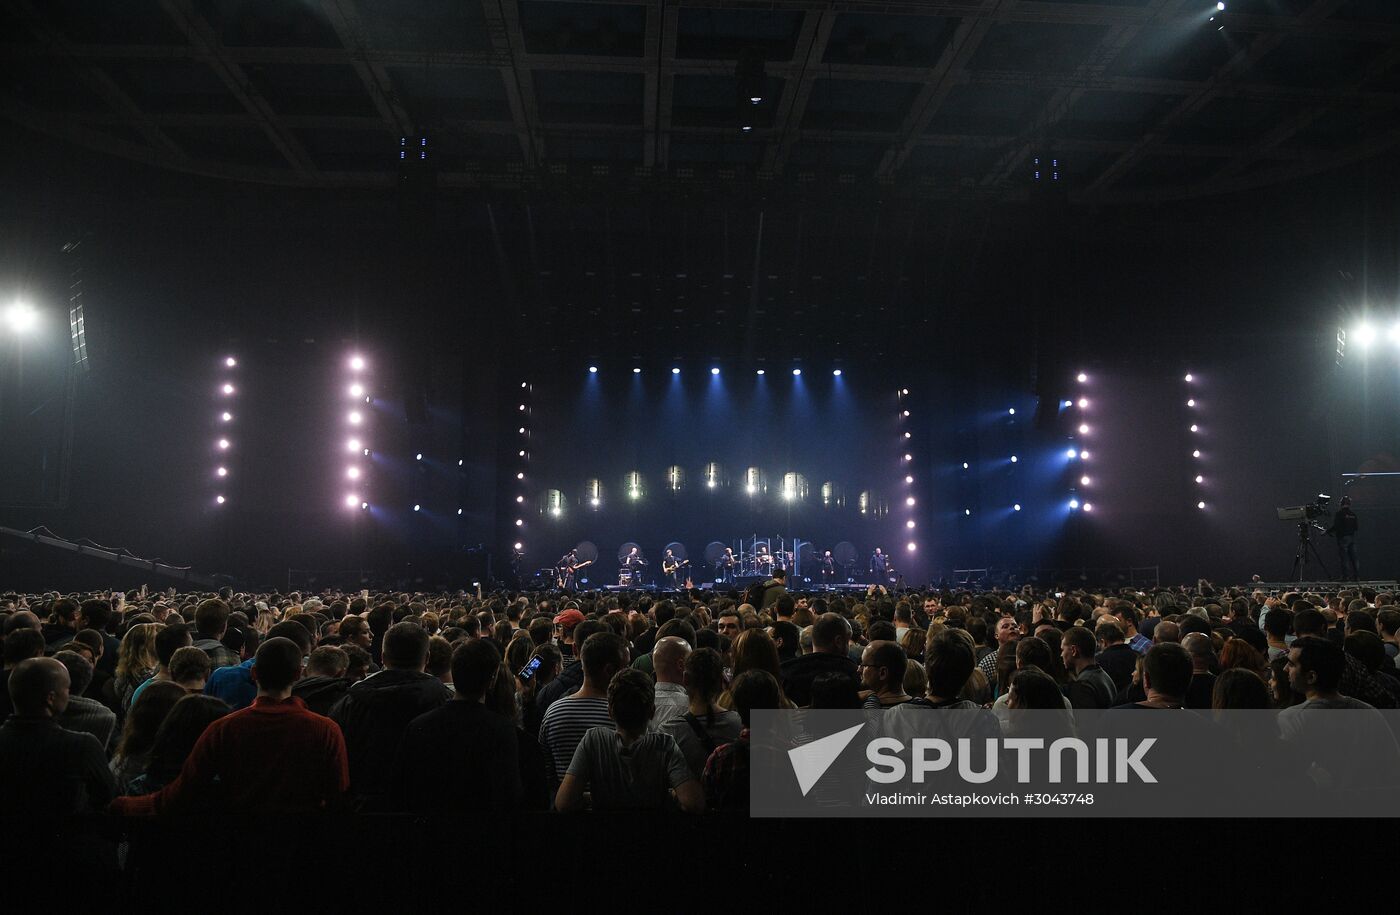 Rock band DDT gives concert in Moscow